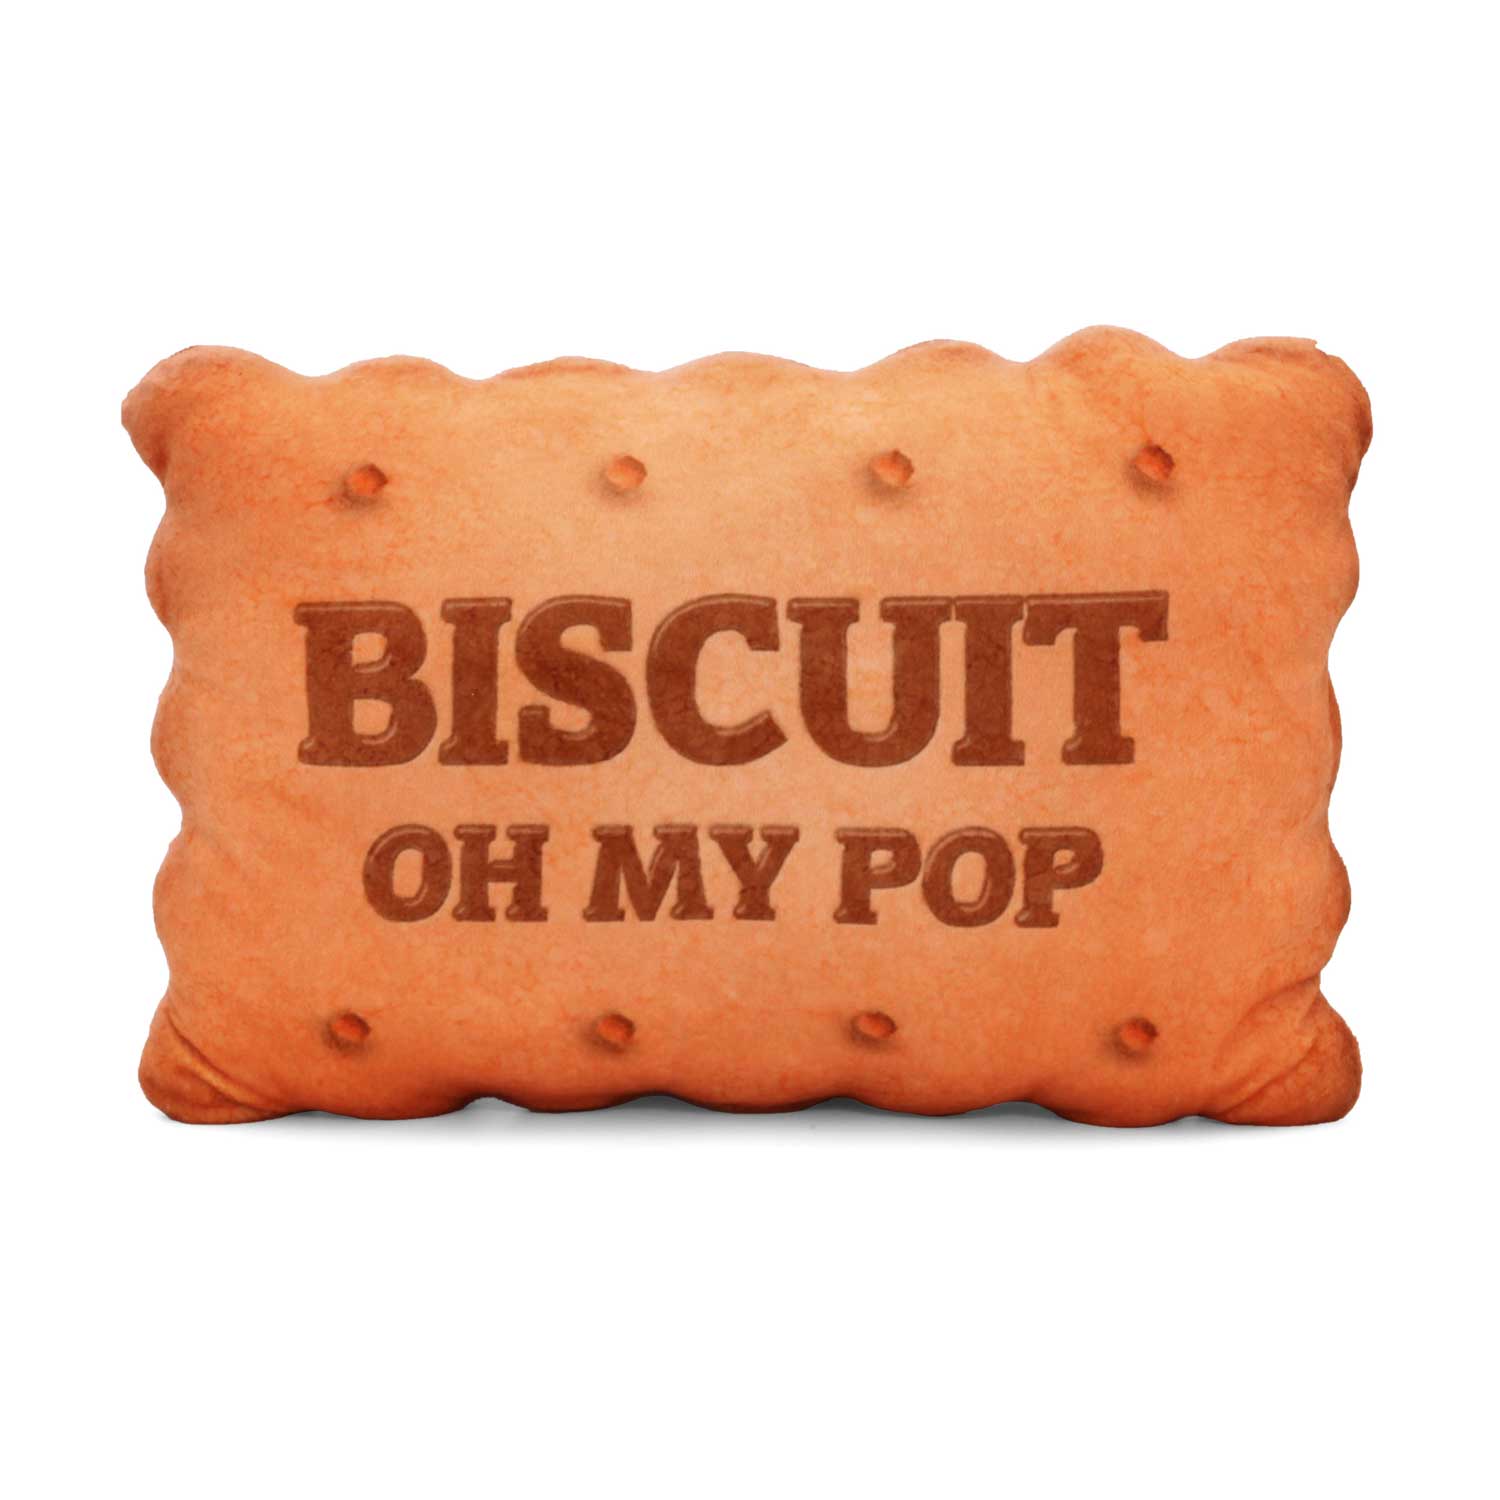 Large Cushion Oh My Pop! Biscuit